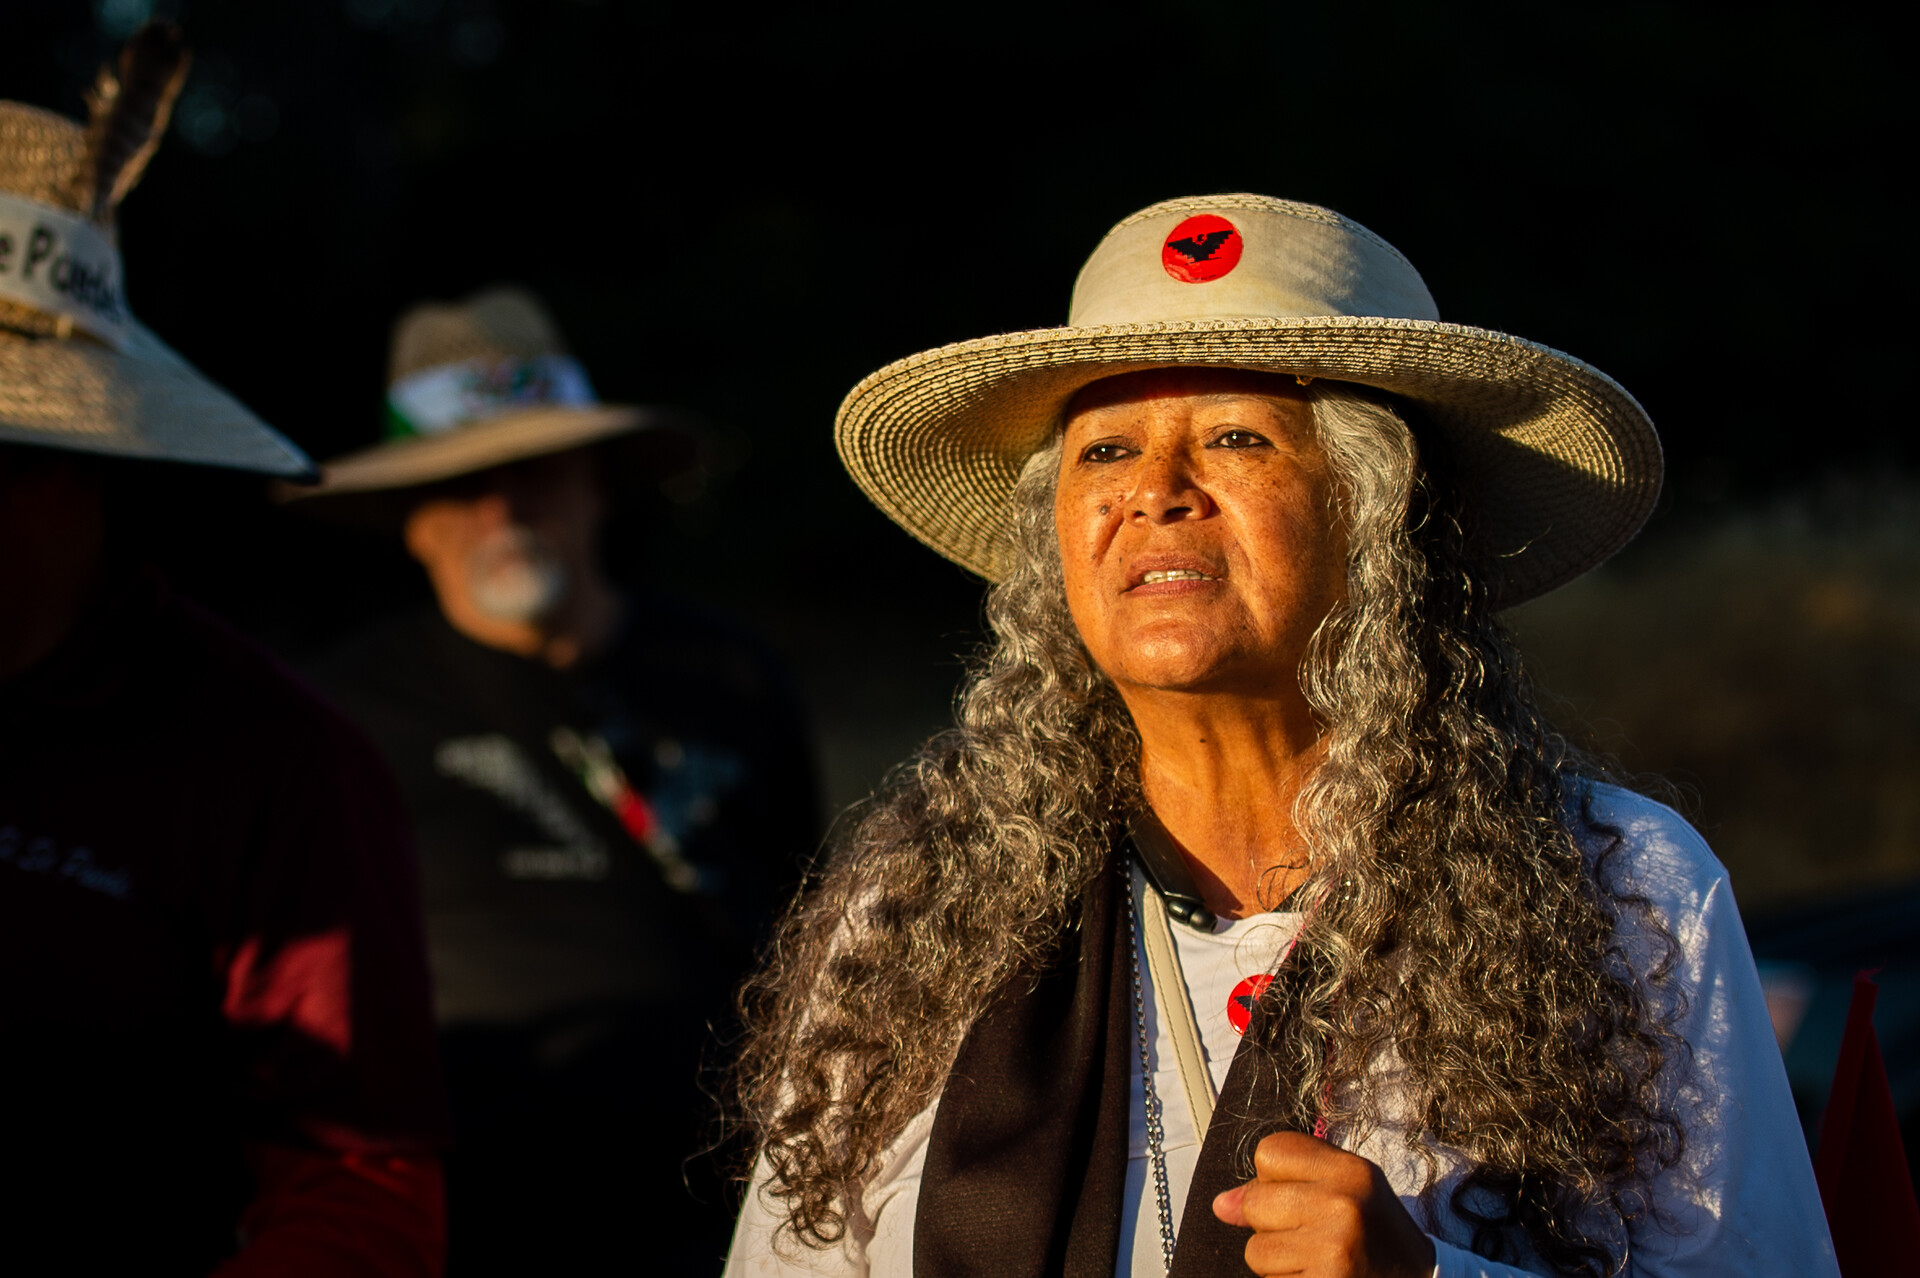 woman with long grey hair wearing hat and light by early morning sun speaks as others listen